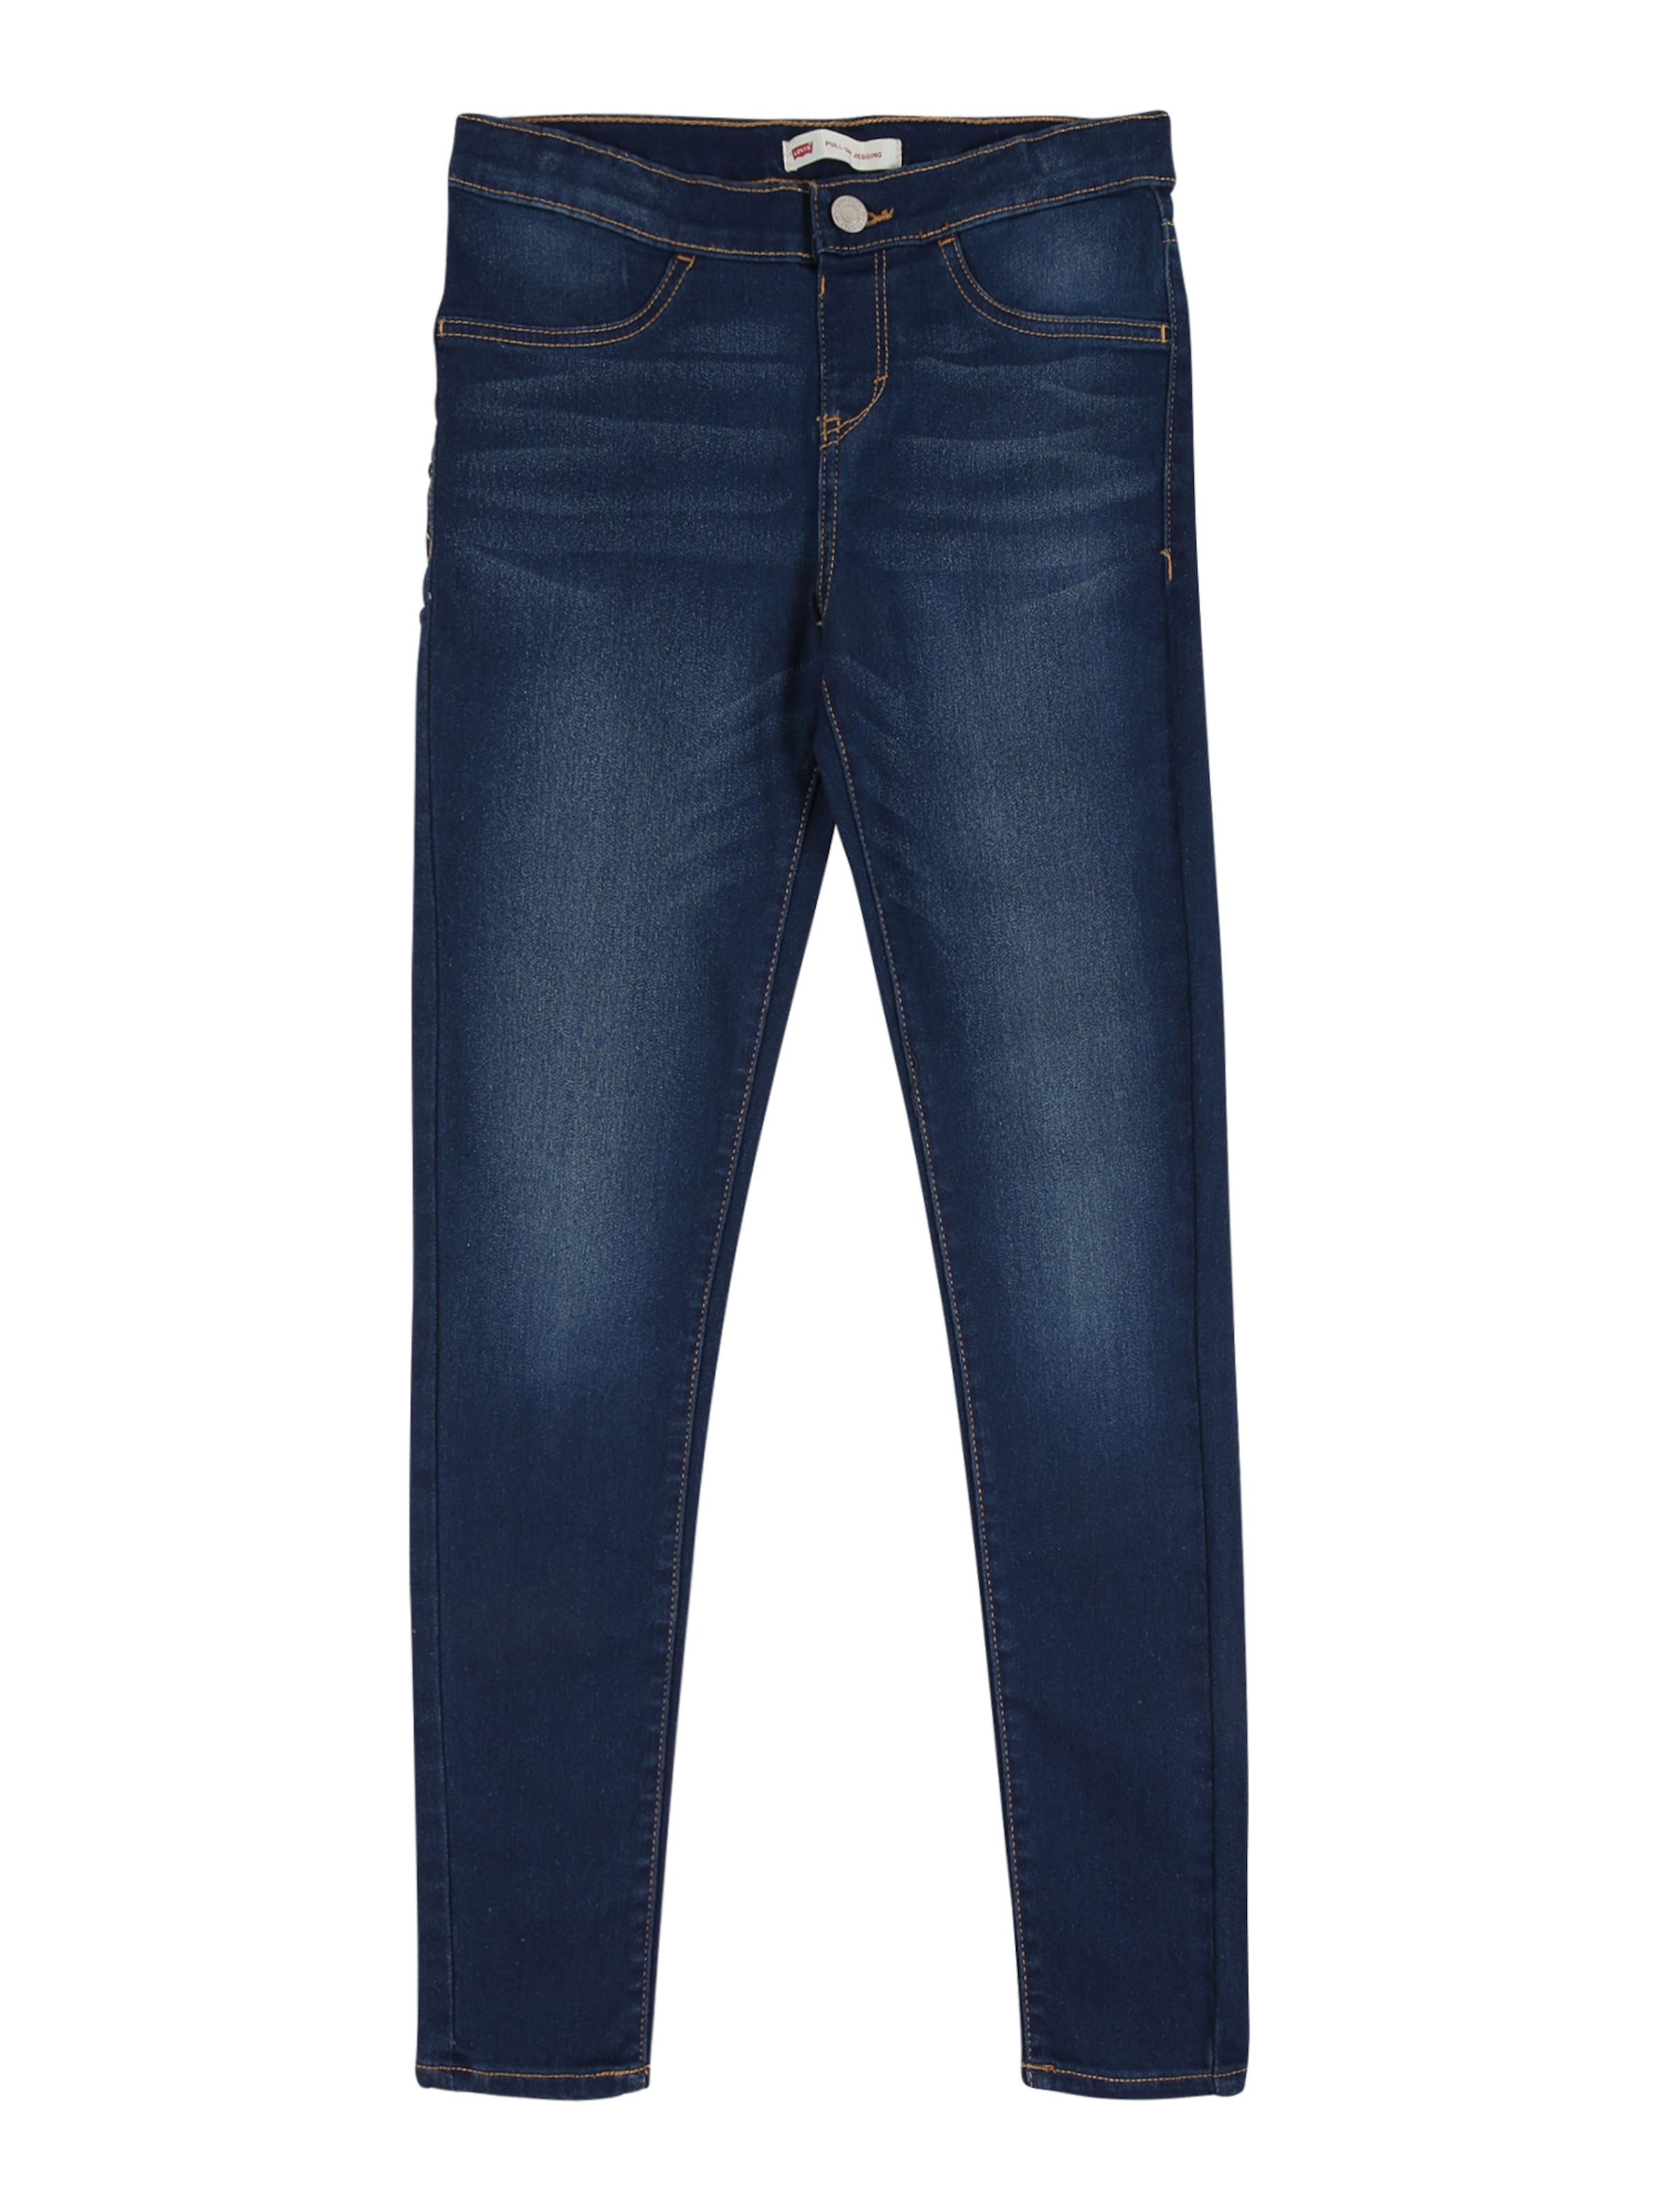 LEVI'S Jeans 'LVG Pull On' in Blauw 